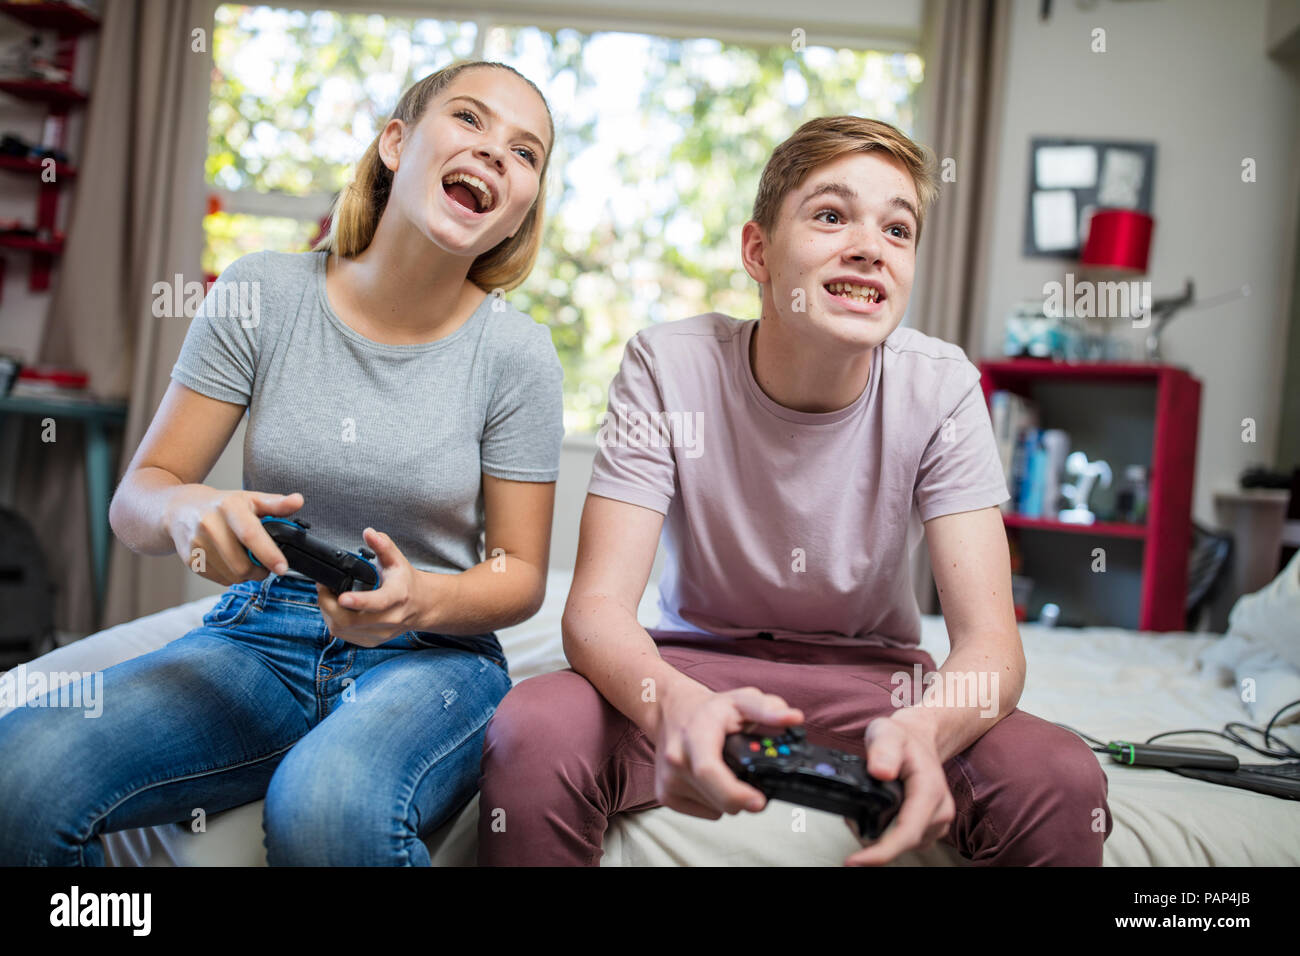 Happy teenage girl and boy sitting on bed playing video game Stock Photo